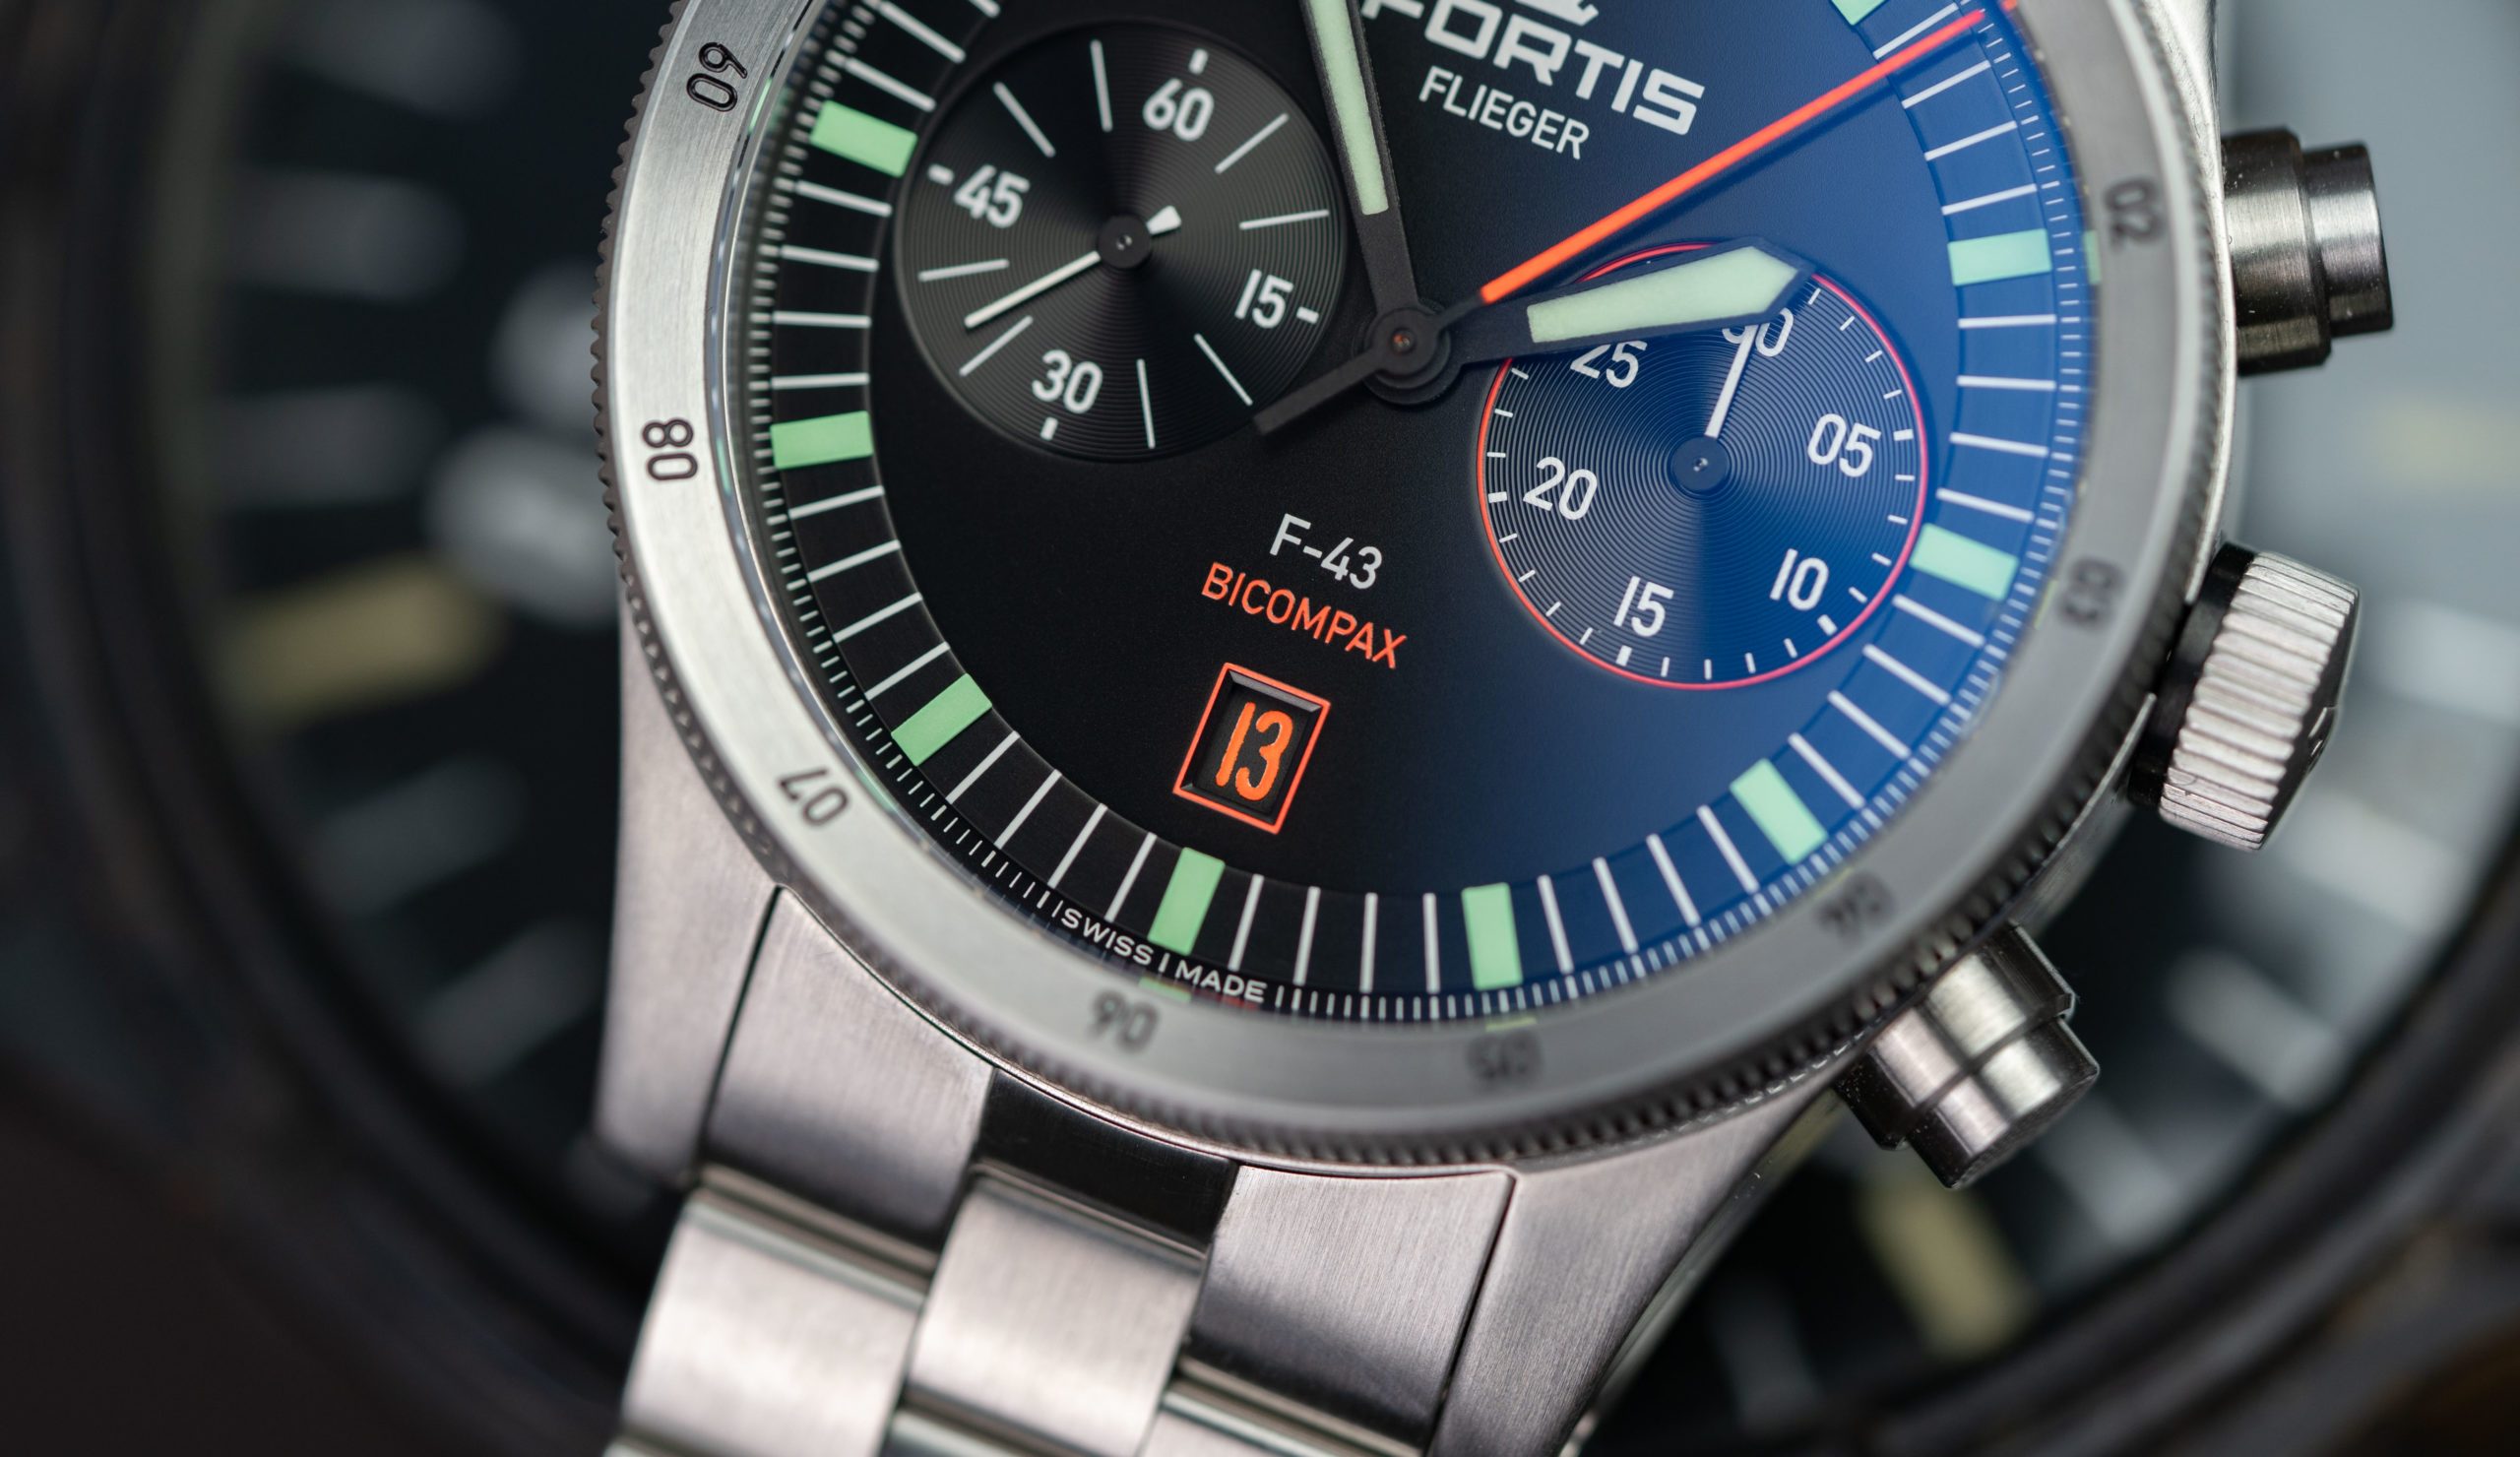 Fortis-Flieger-Chronograph-F43-Bicompax-1